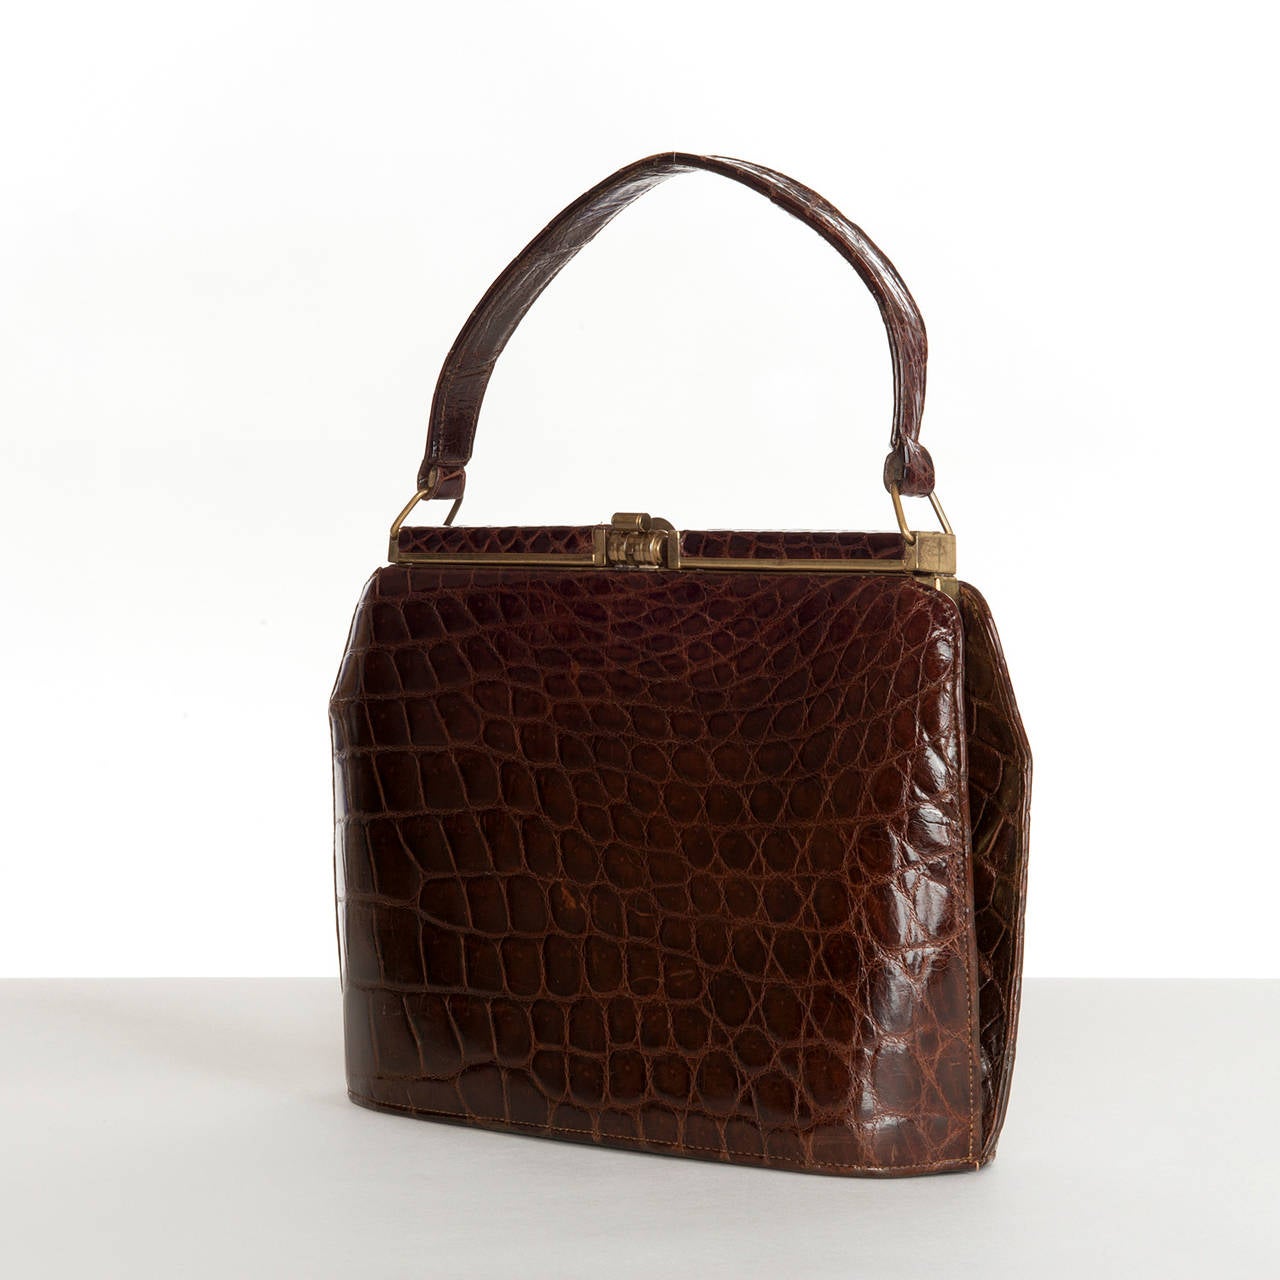 A superb, high quality, Vintage Crocodile handbag, made in circa 1960, probably for Aspreys of London. English made, to the highest standards, the bag is fitted with gold tone hardware. The suede lined interior has two leather trimmed pockets and a